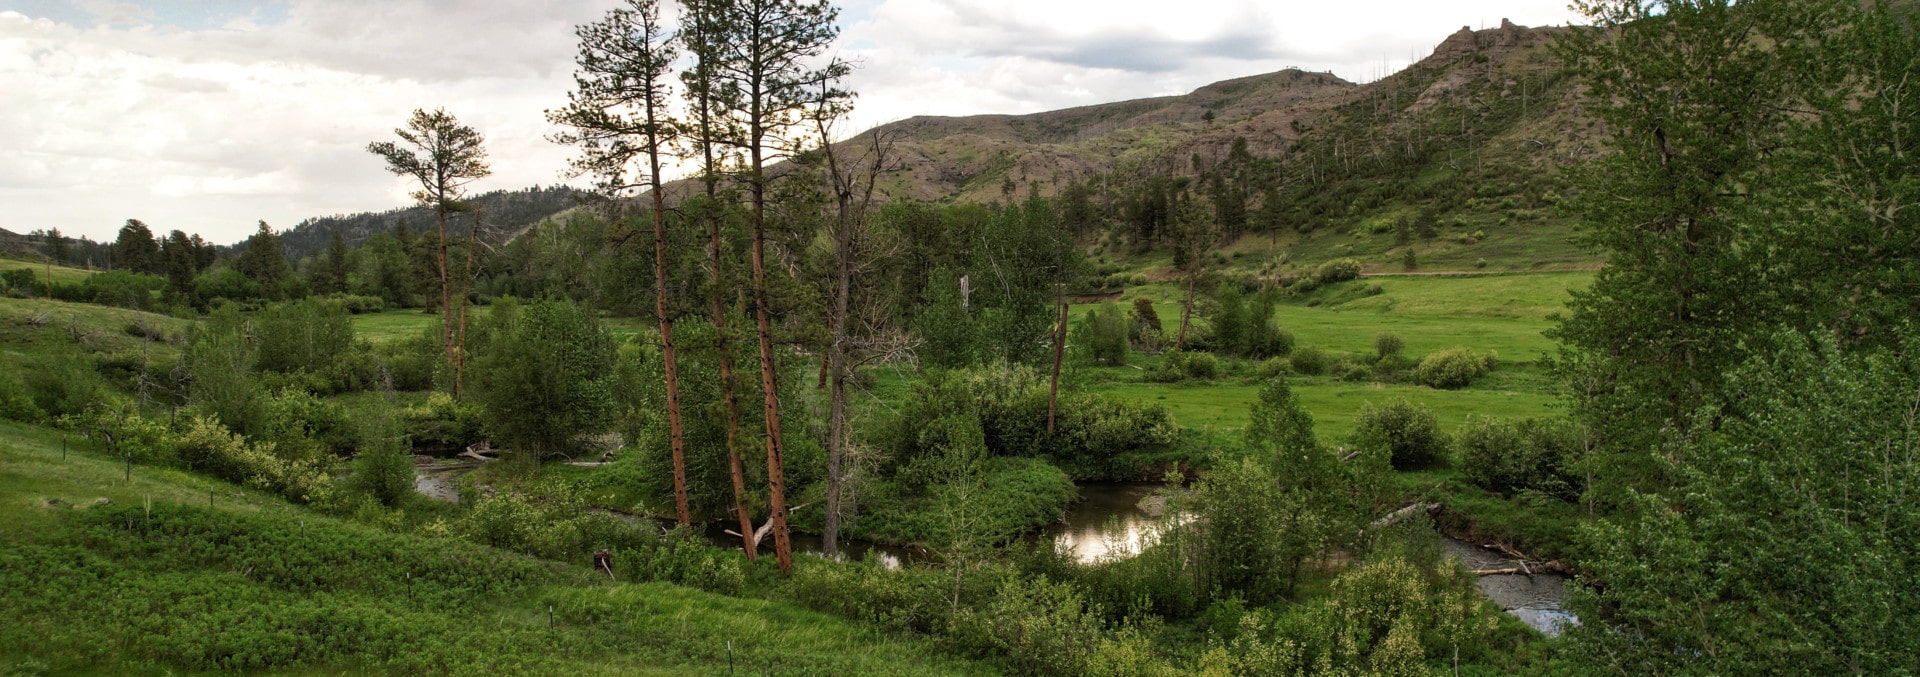 Recreational Hunting Property For Sale Montana